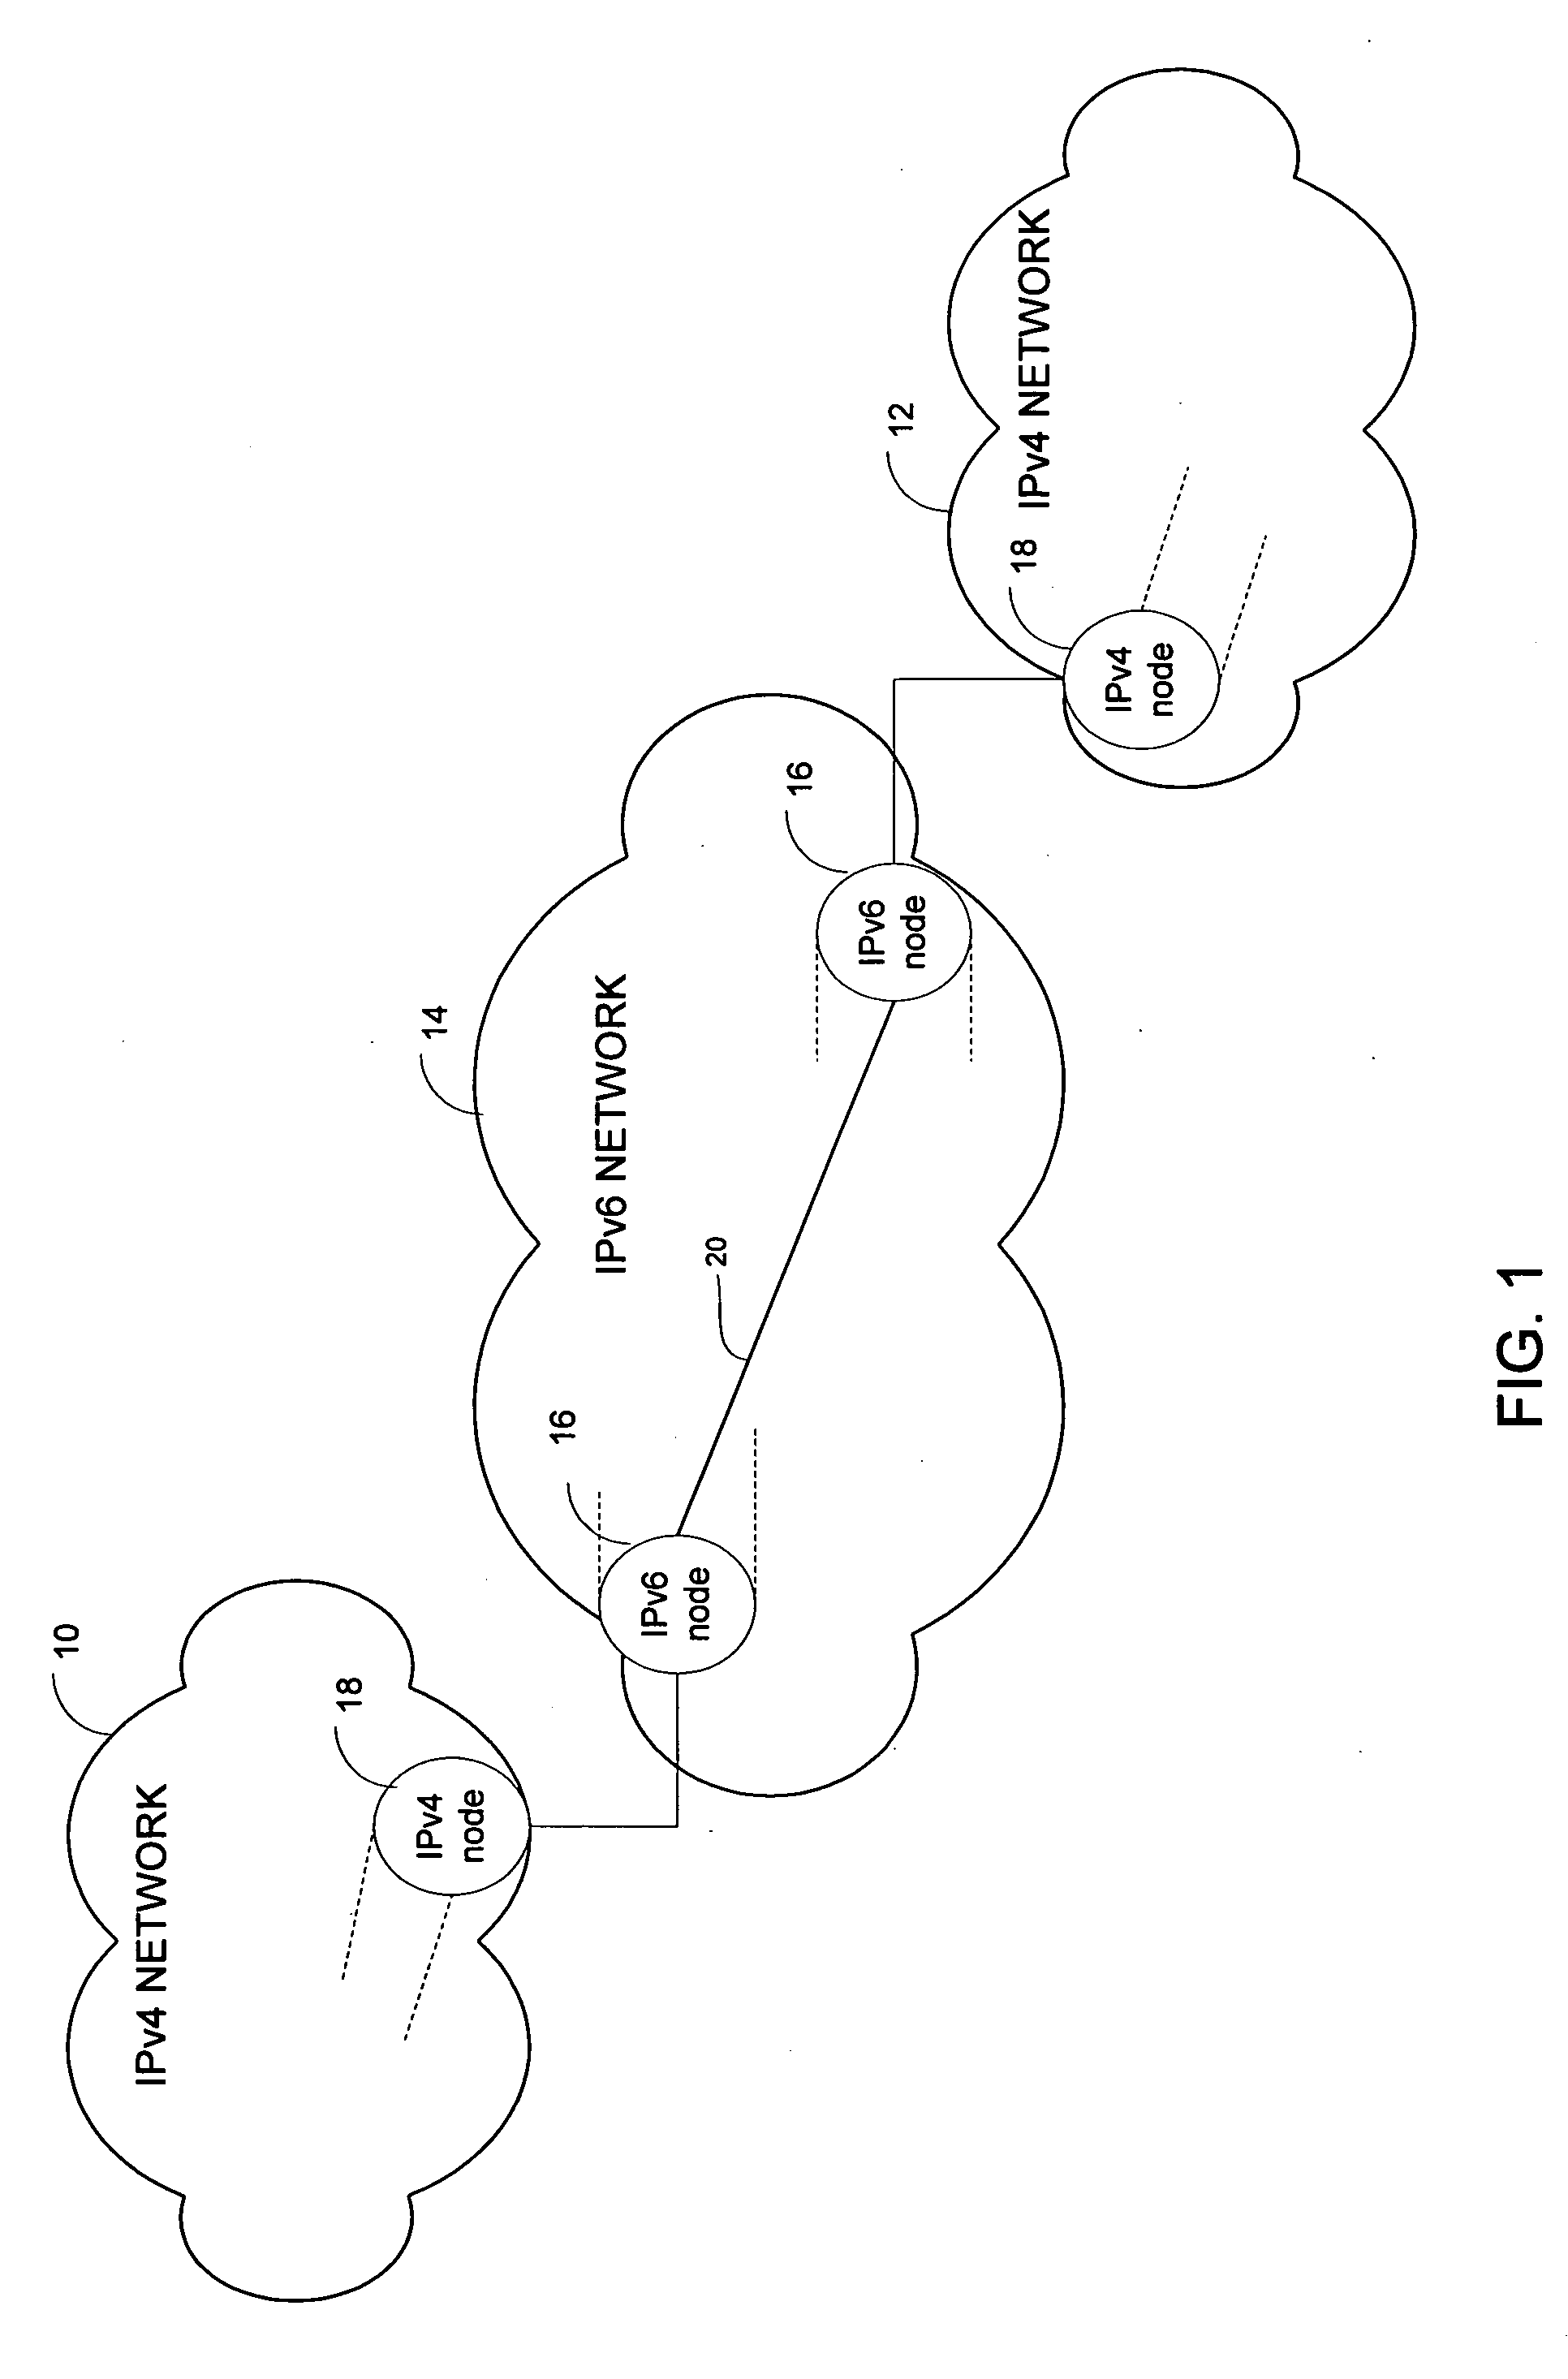 Method and system for automatically interconnecting IPv4 networks across an IPv6 network